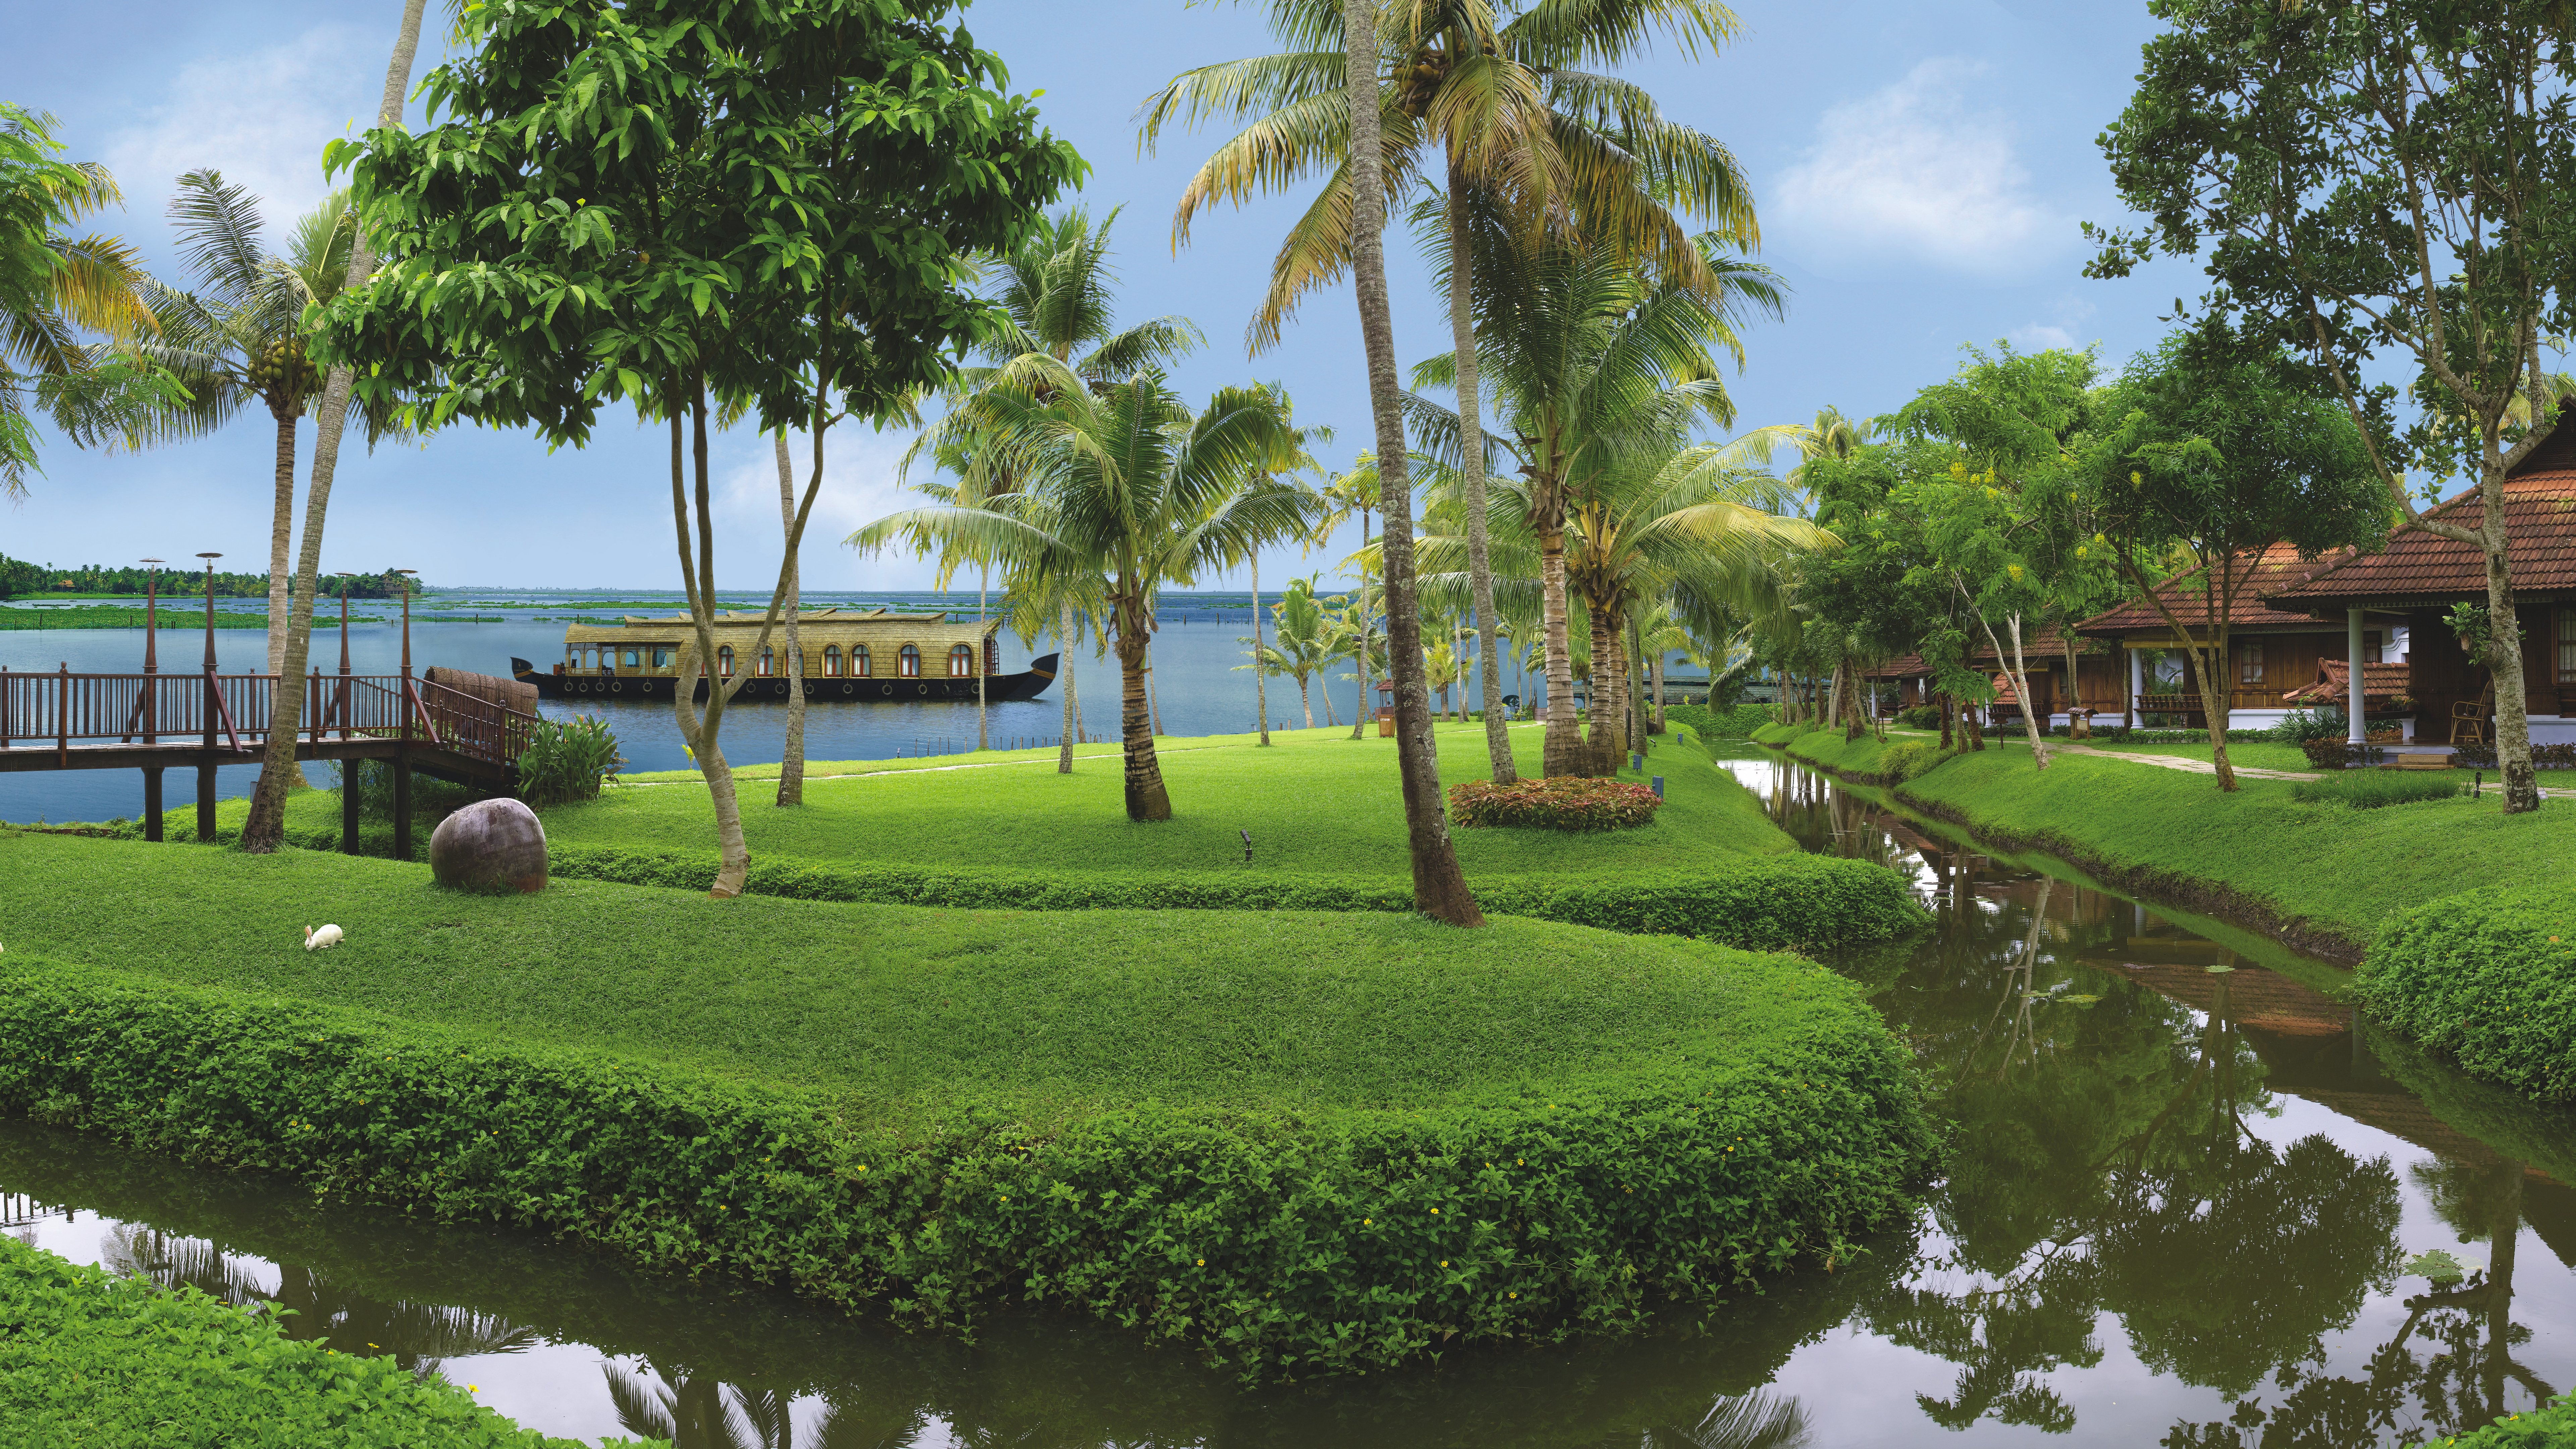 Green Palm Trees Near Body of Water During Daytime. Wallpaper in 7680x4320 Resolution